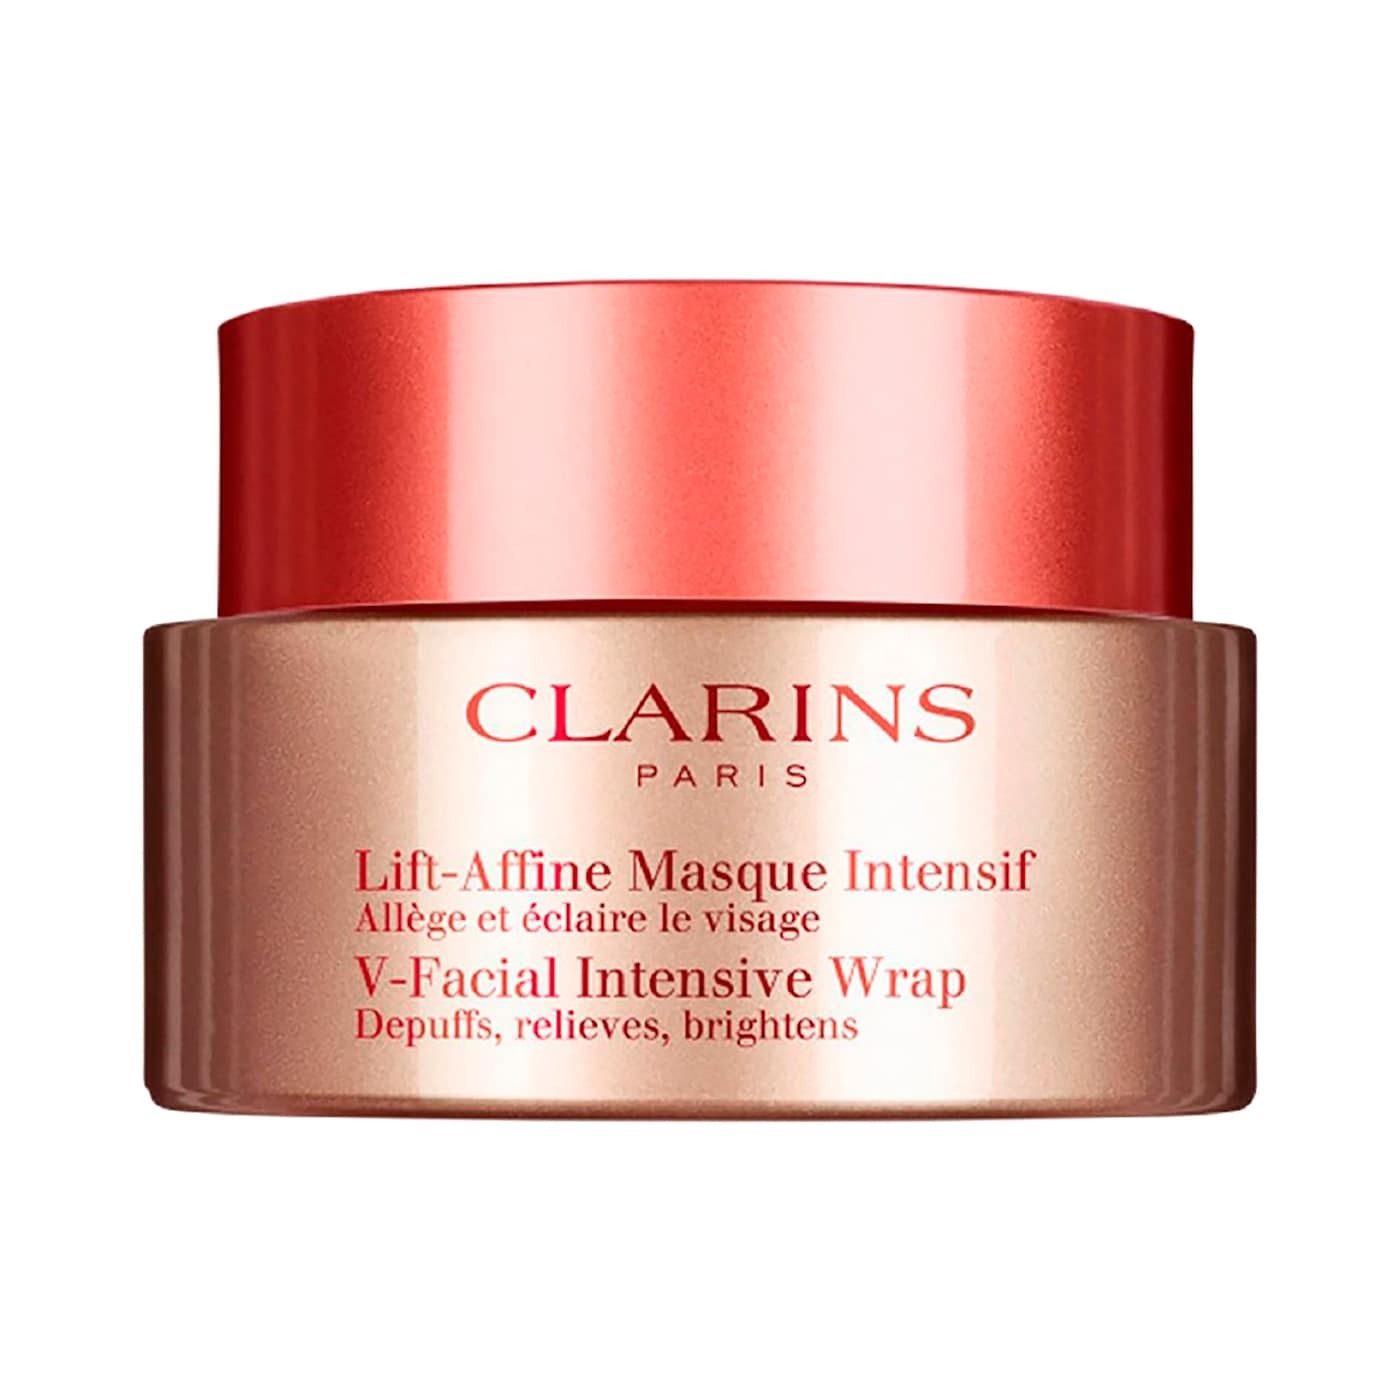 review-cryo-flash-mask-clarins-308384-16